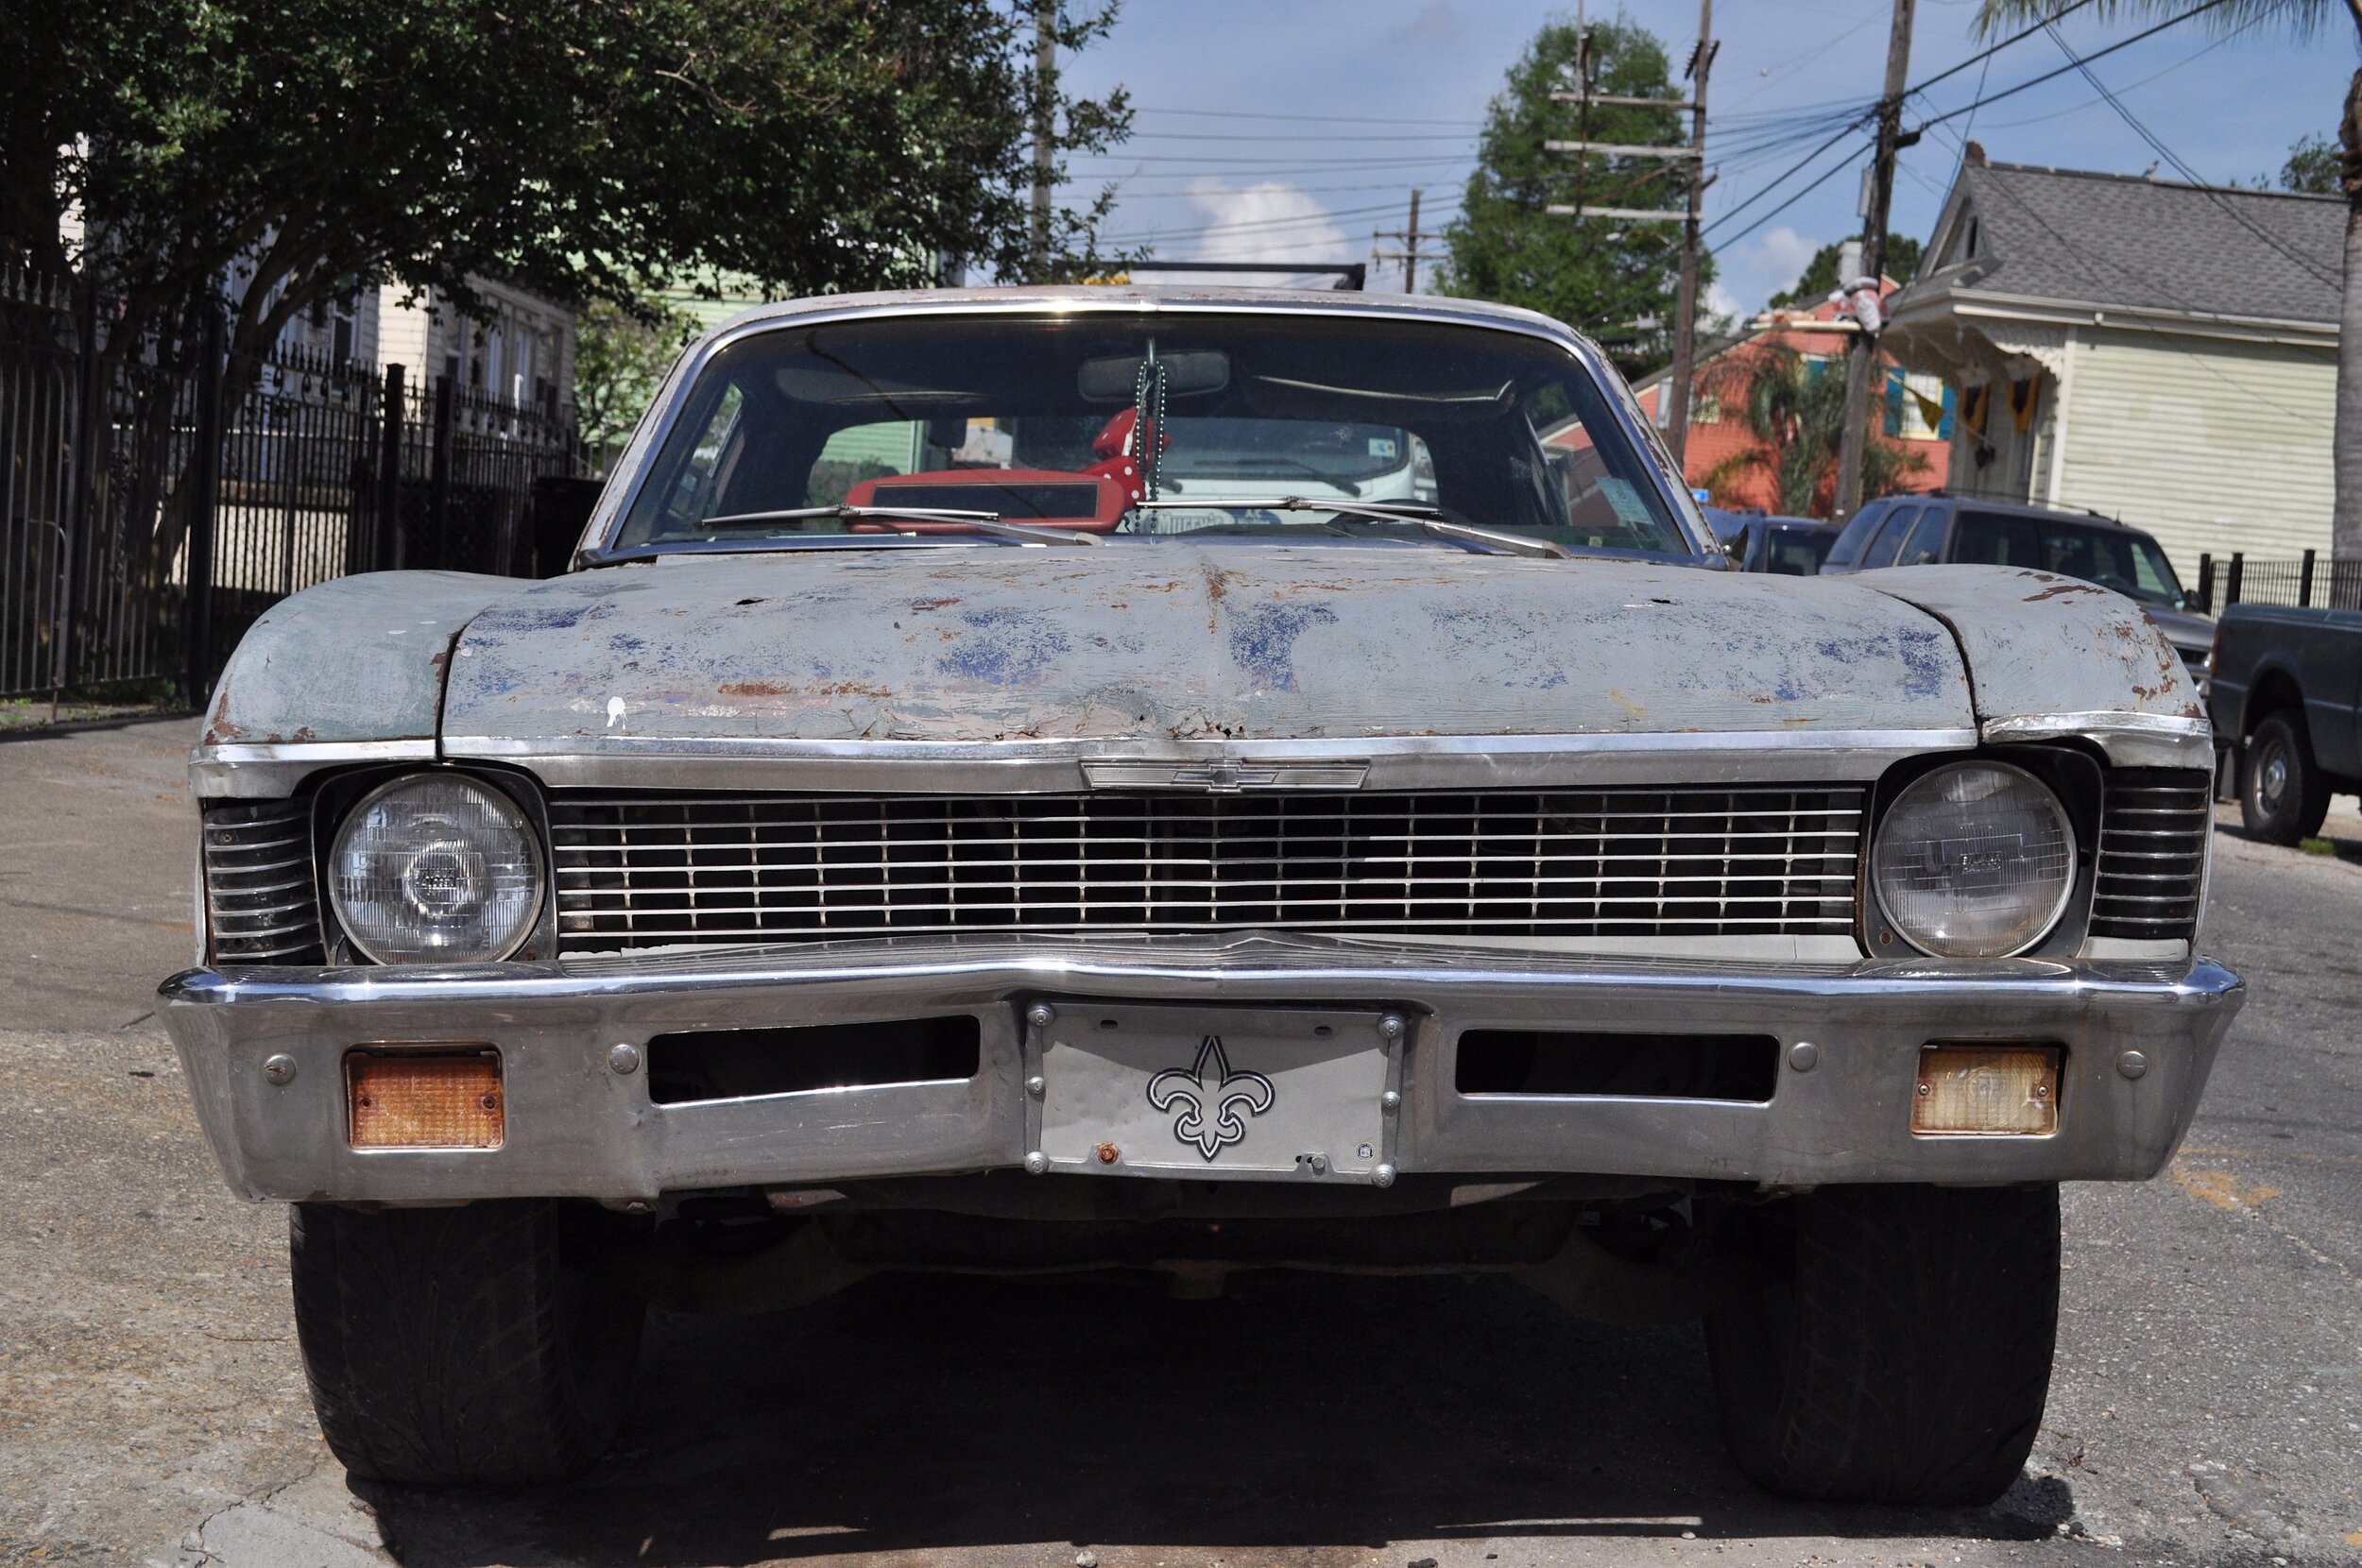 Bywater Car - New Orleans, Louisiana (2017)